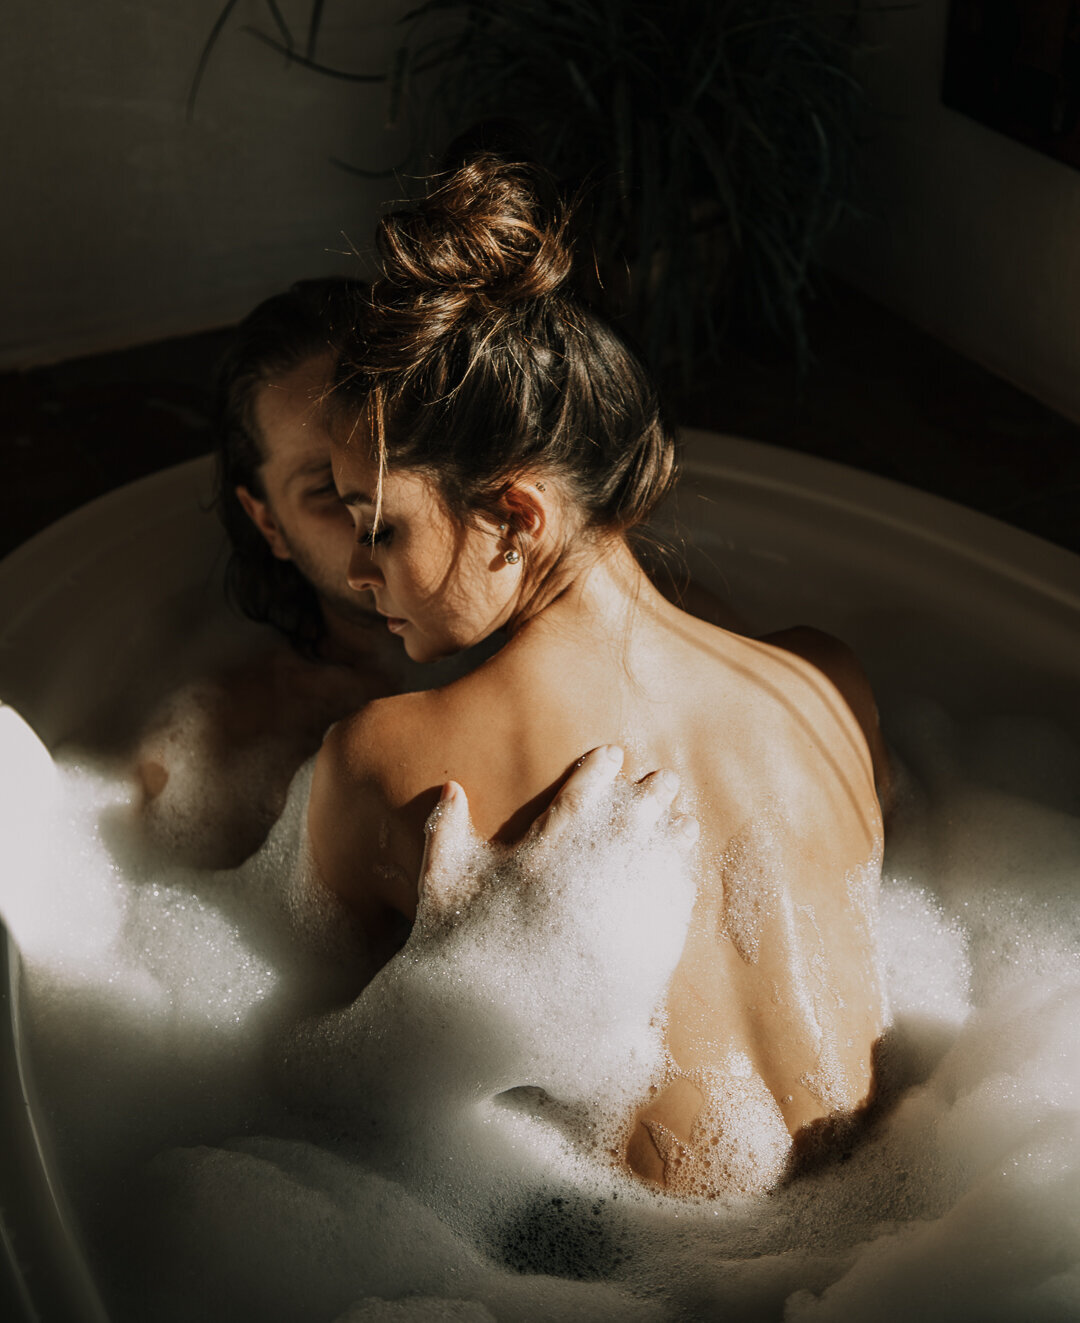 Couple in the bubble bath together